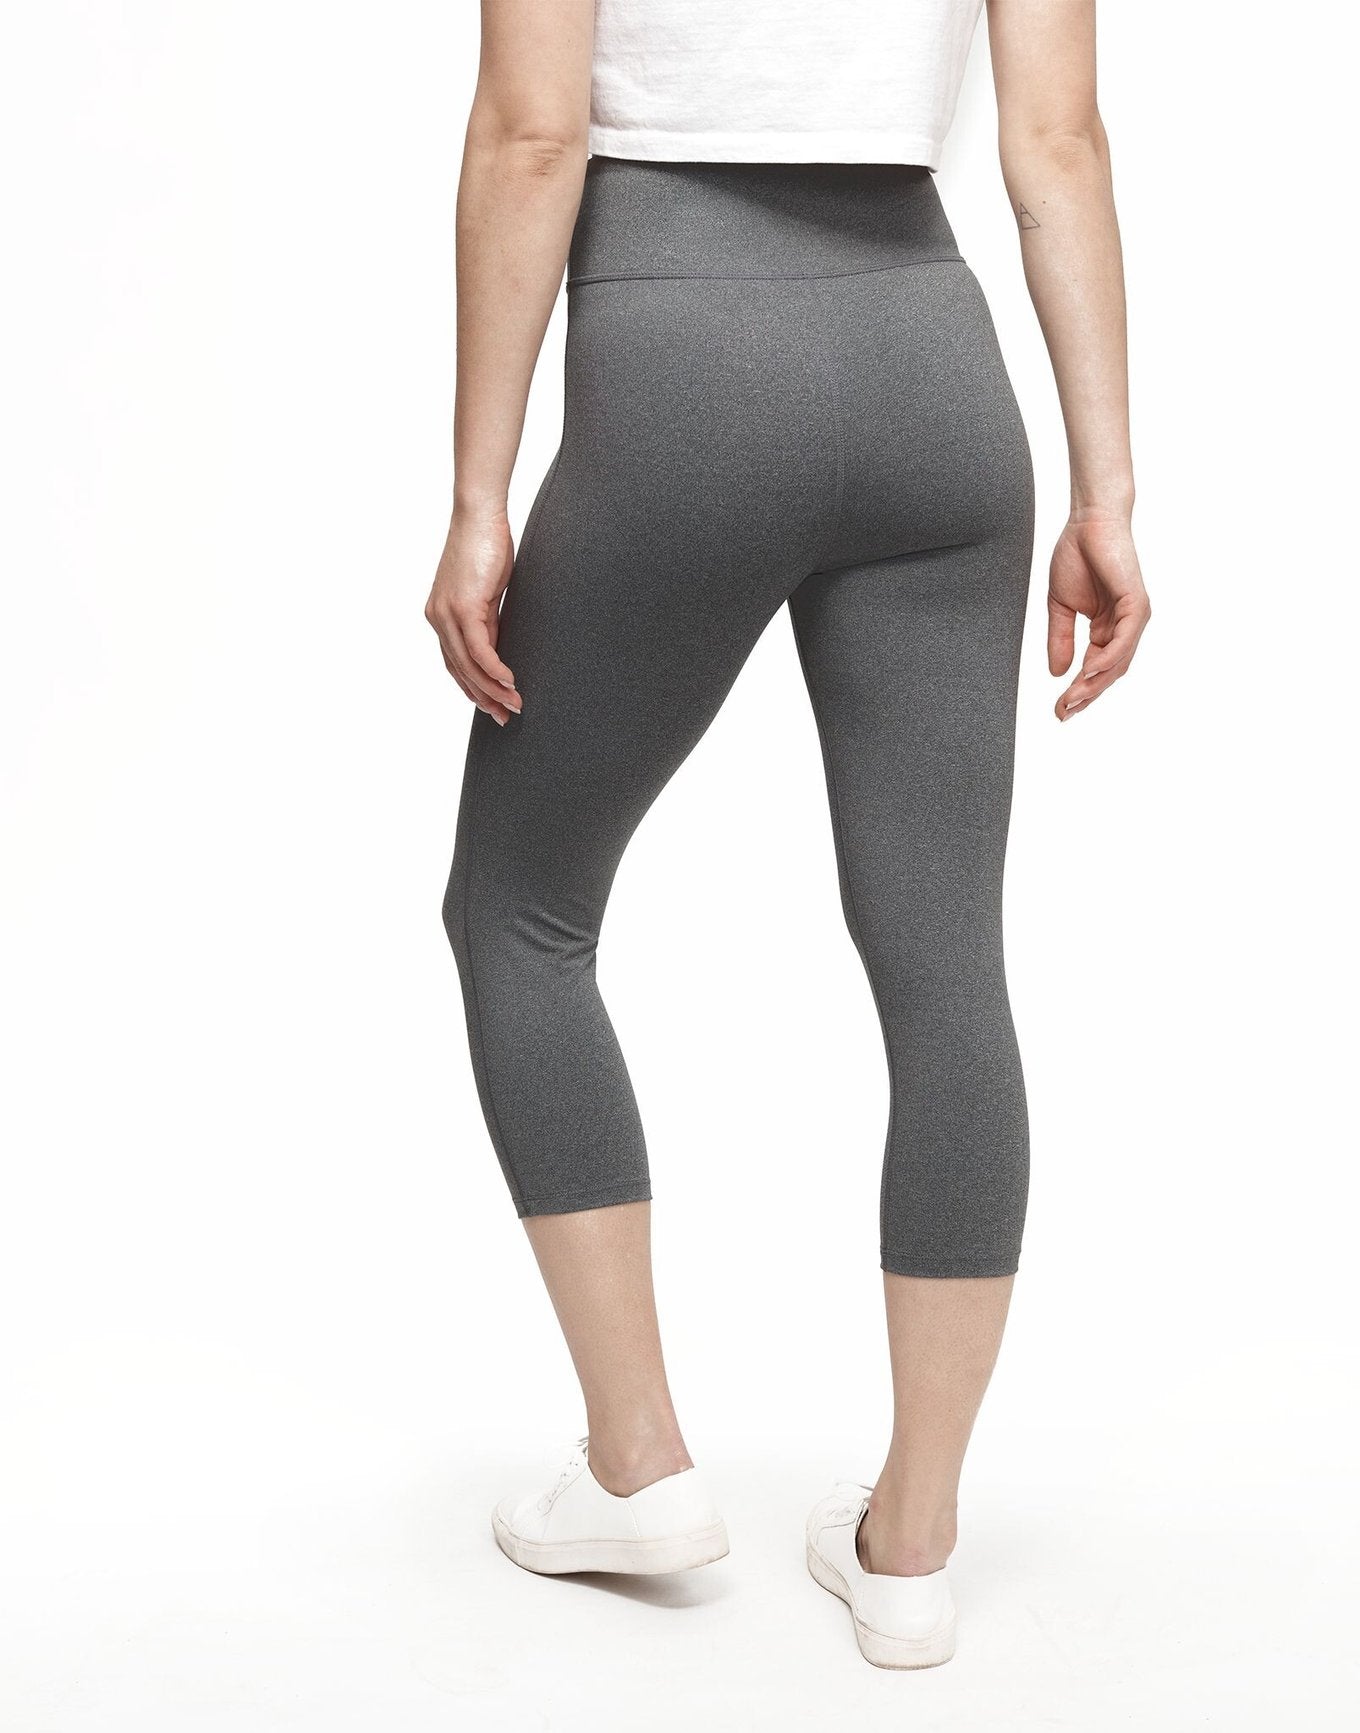 Adore Me Haley Heathered Crop Heather Compression Activewear Crop Legging in color Meteorite Light Heather and shape legging